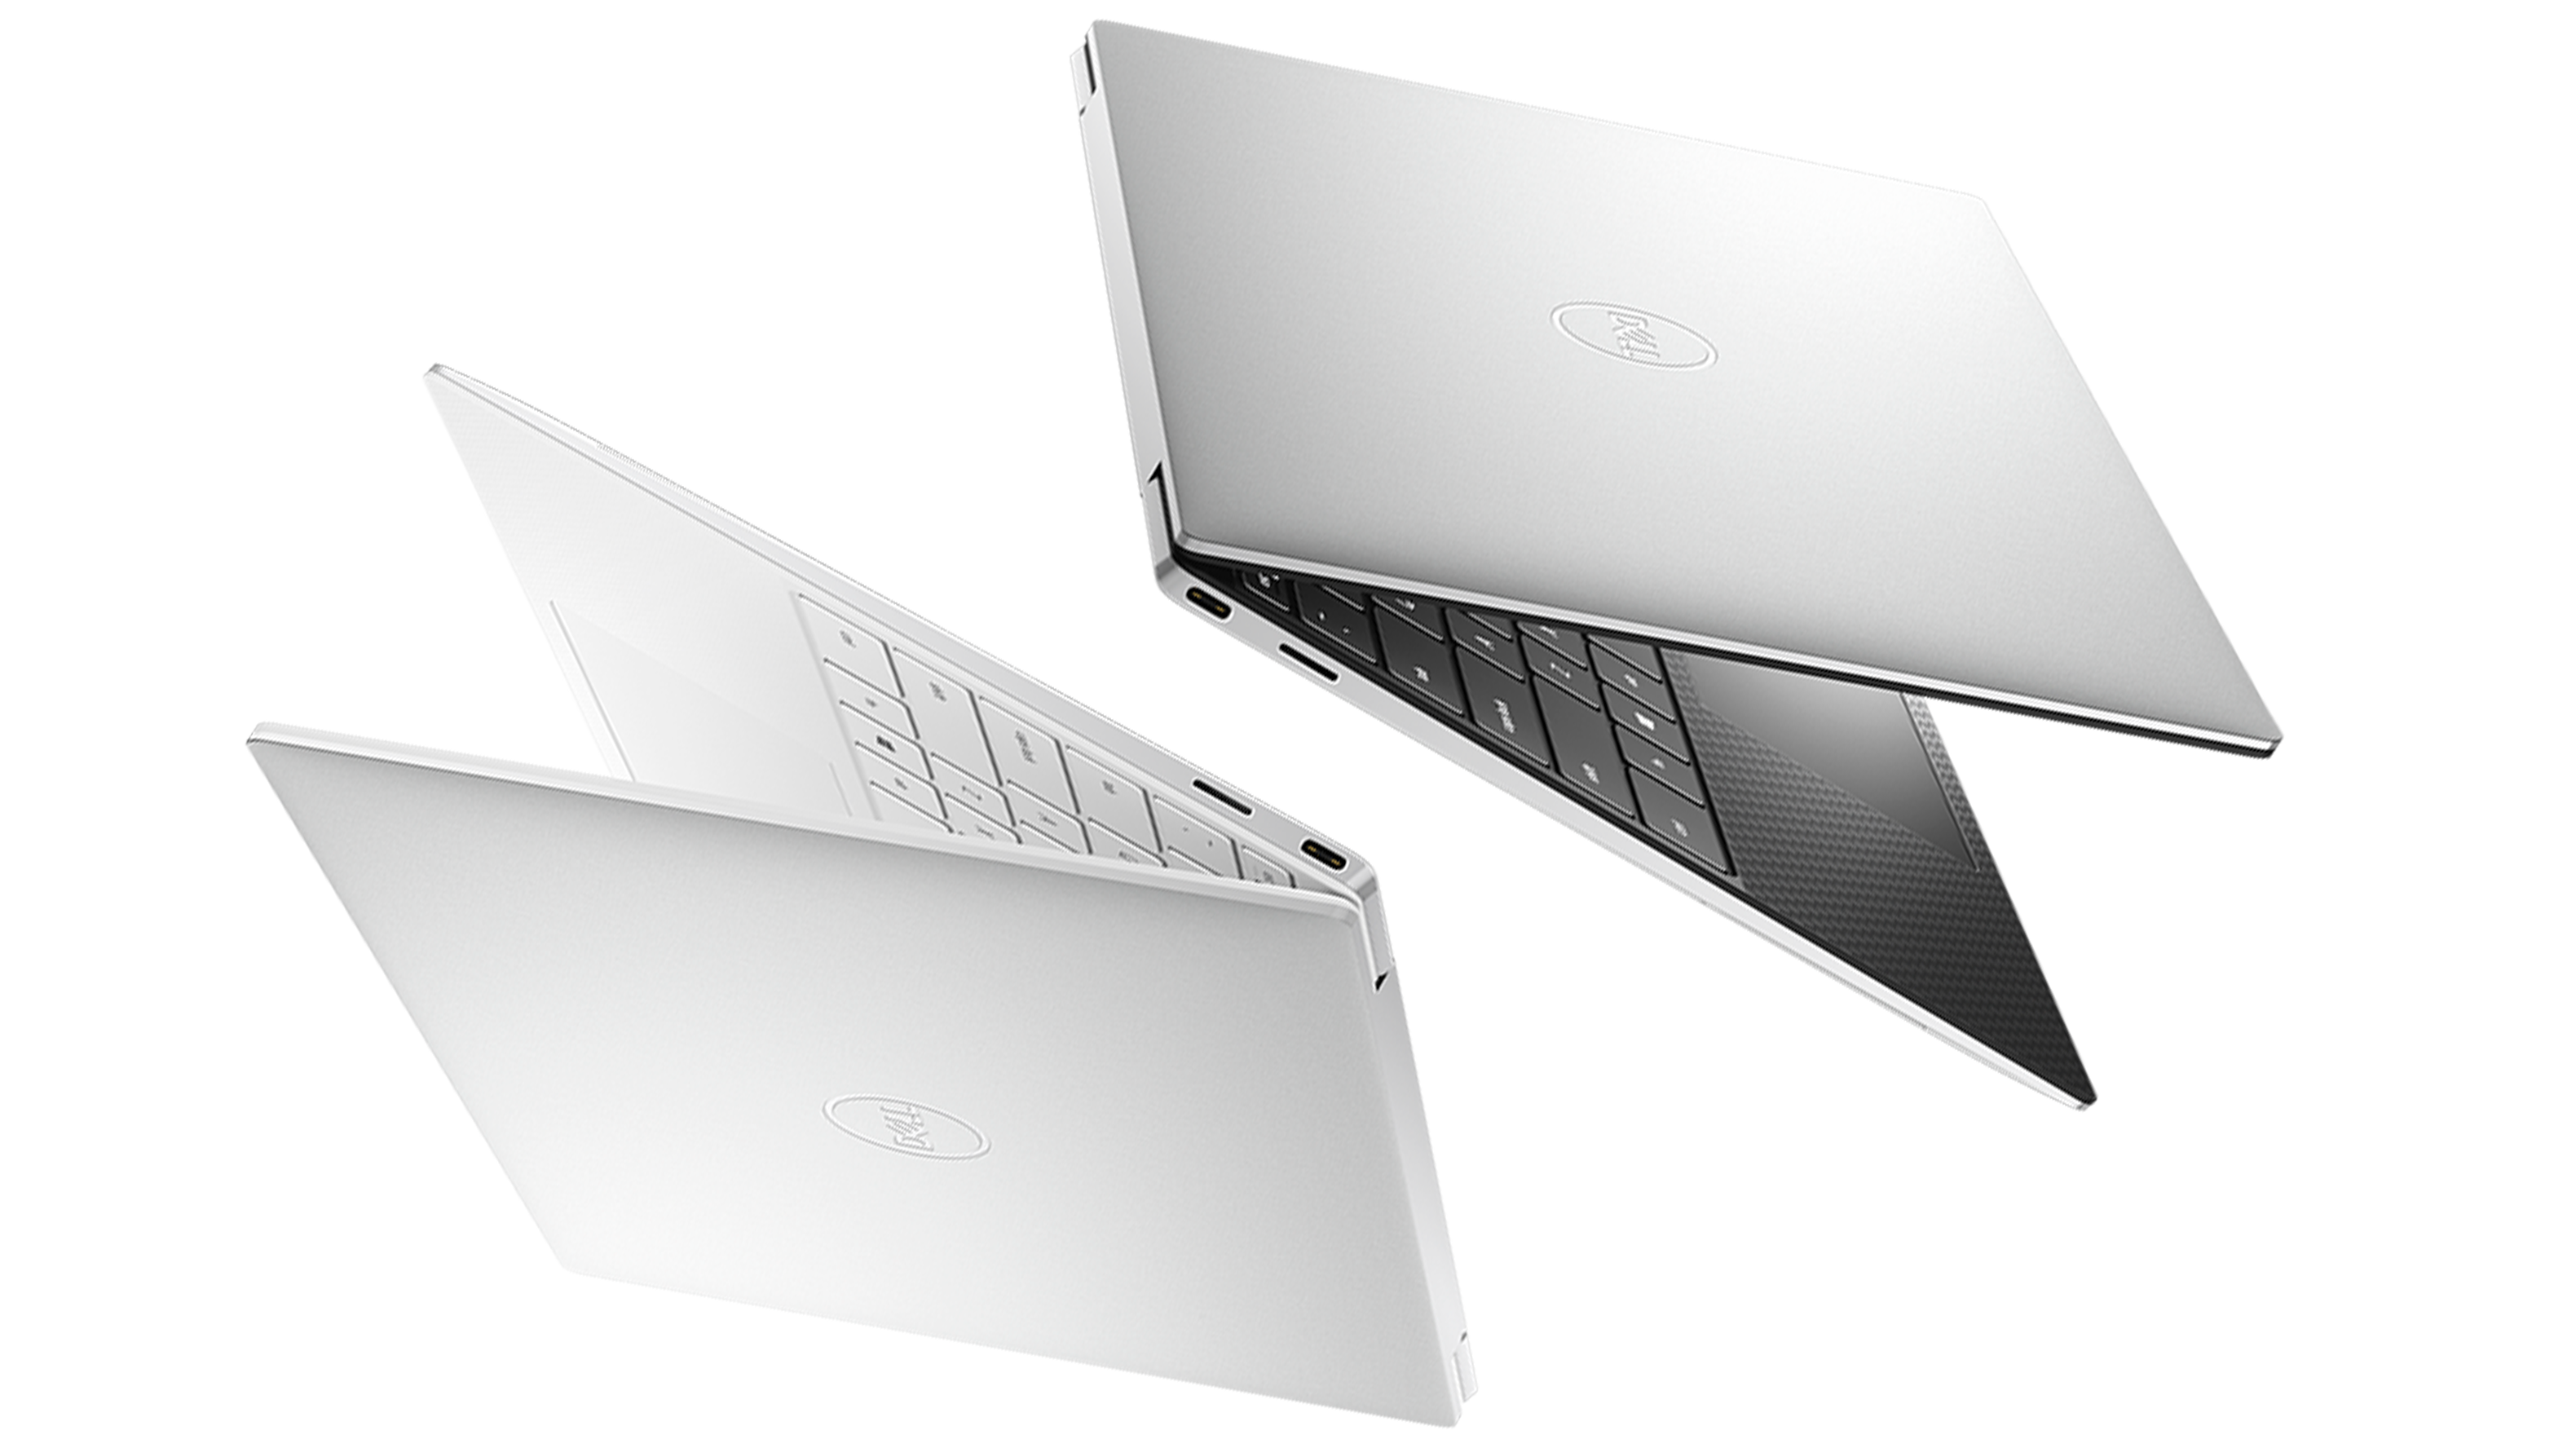 Dell XPS 13 2020 in black and white